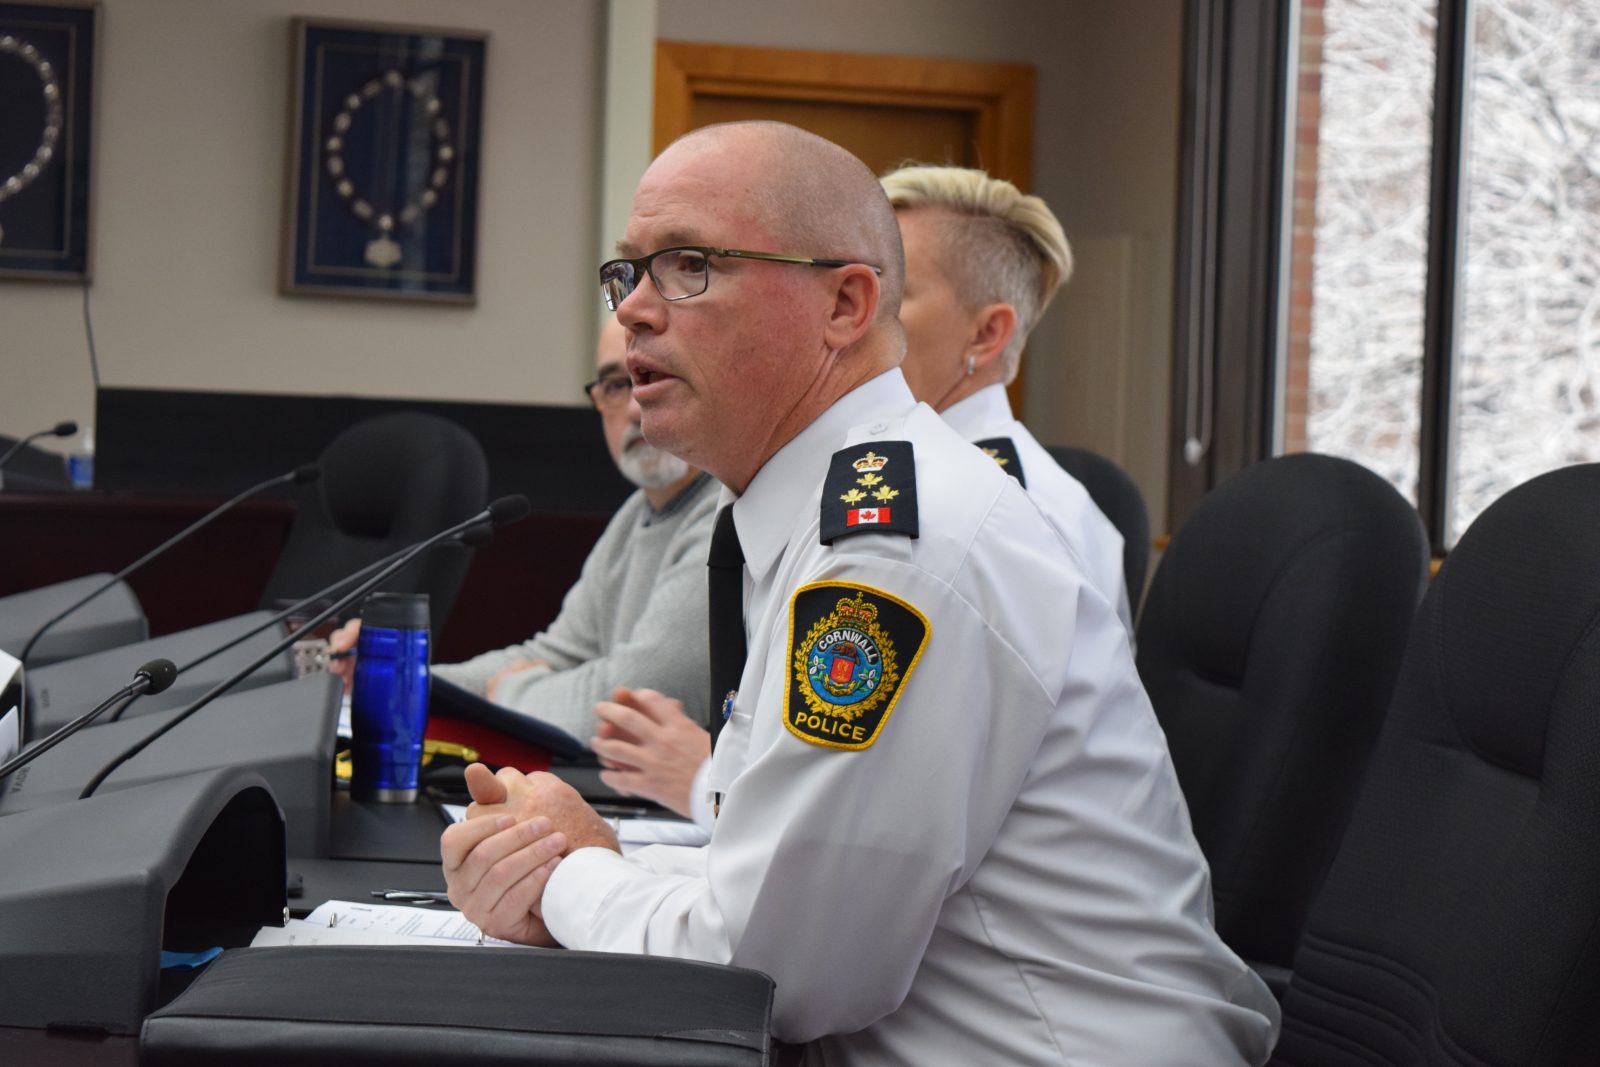 Chief asks for more officers to fill absences